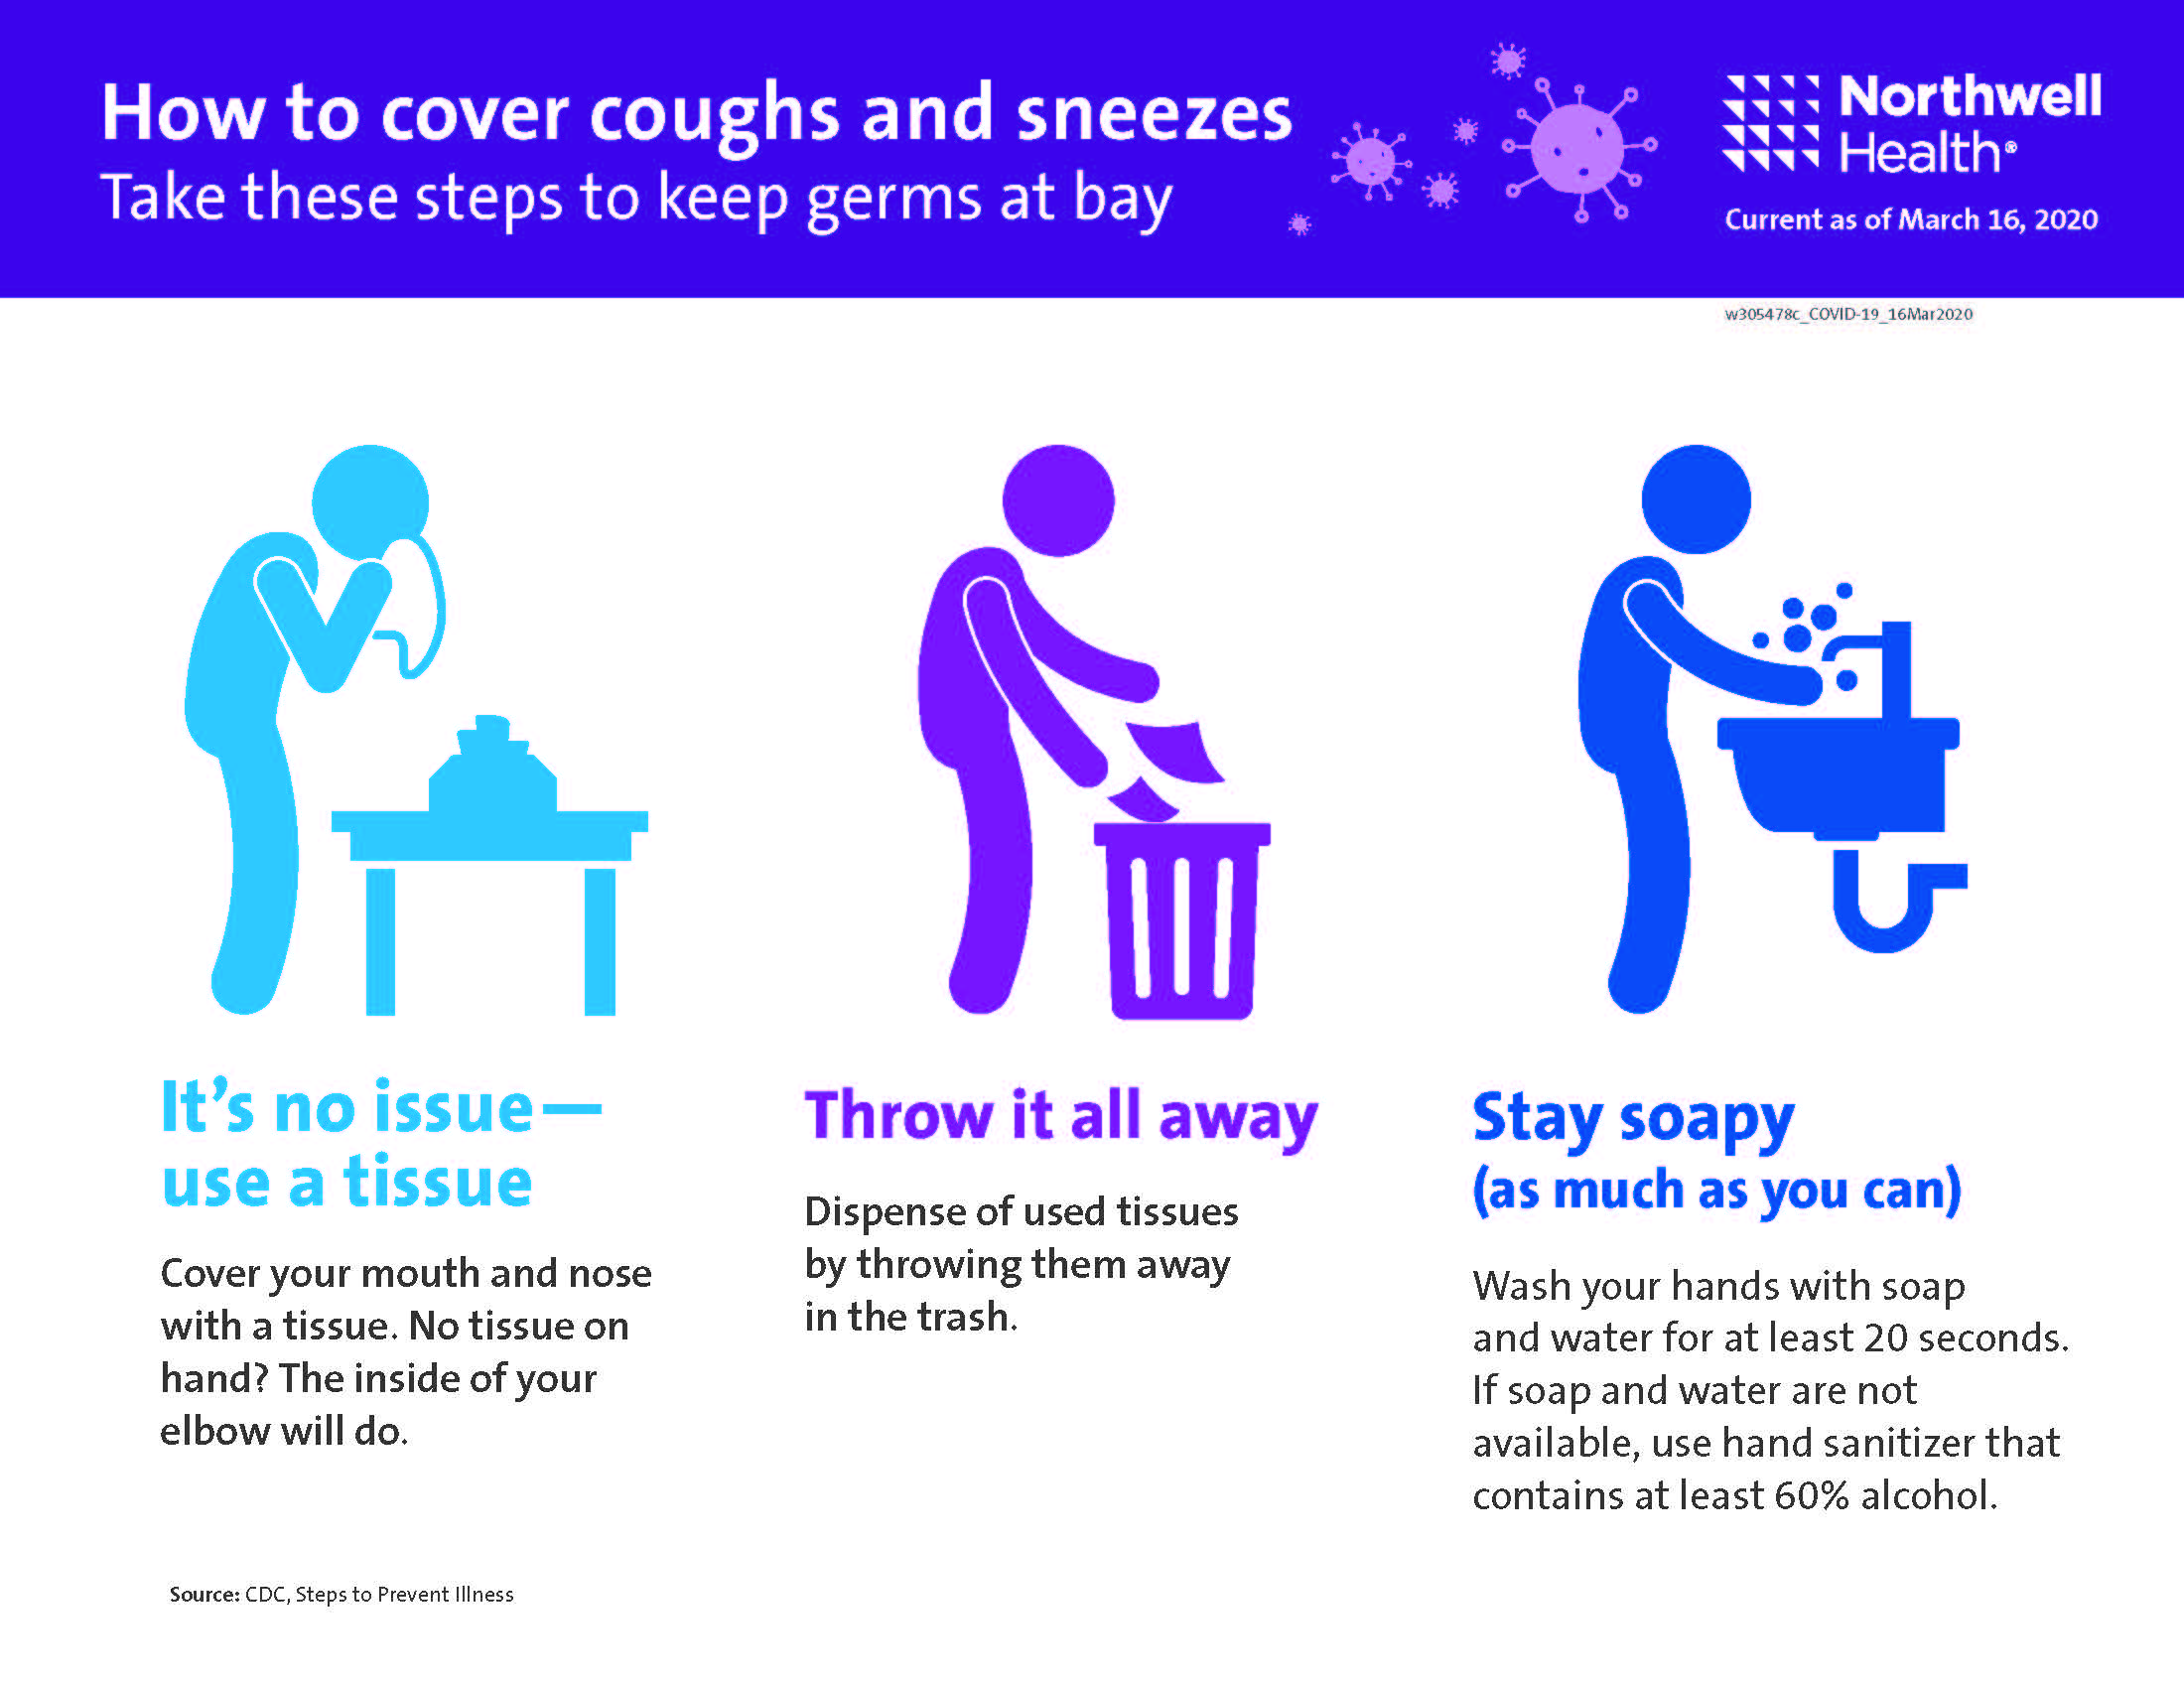 Covering coughs and sneezes the right way